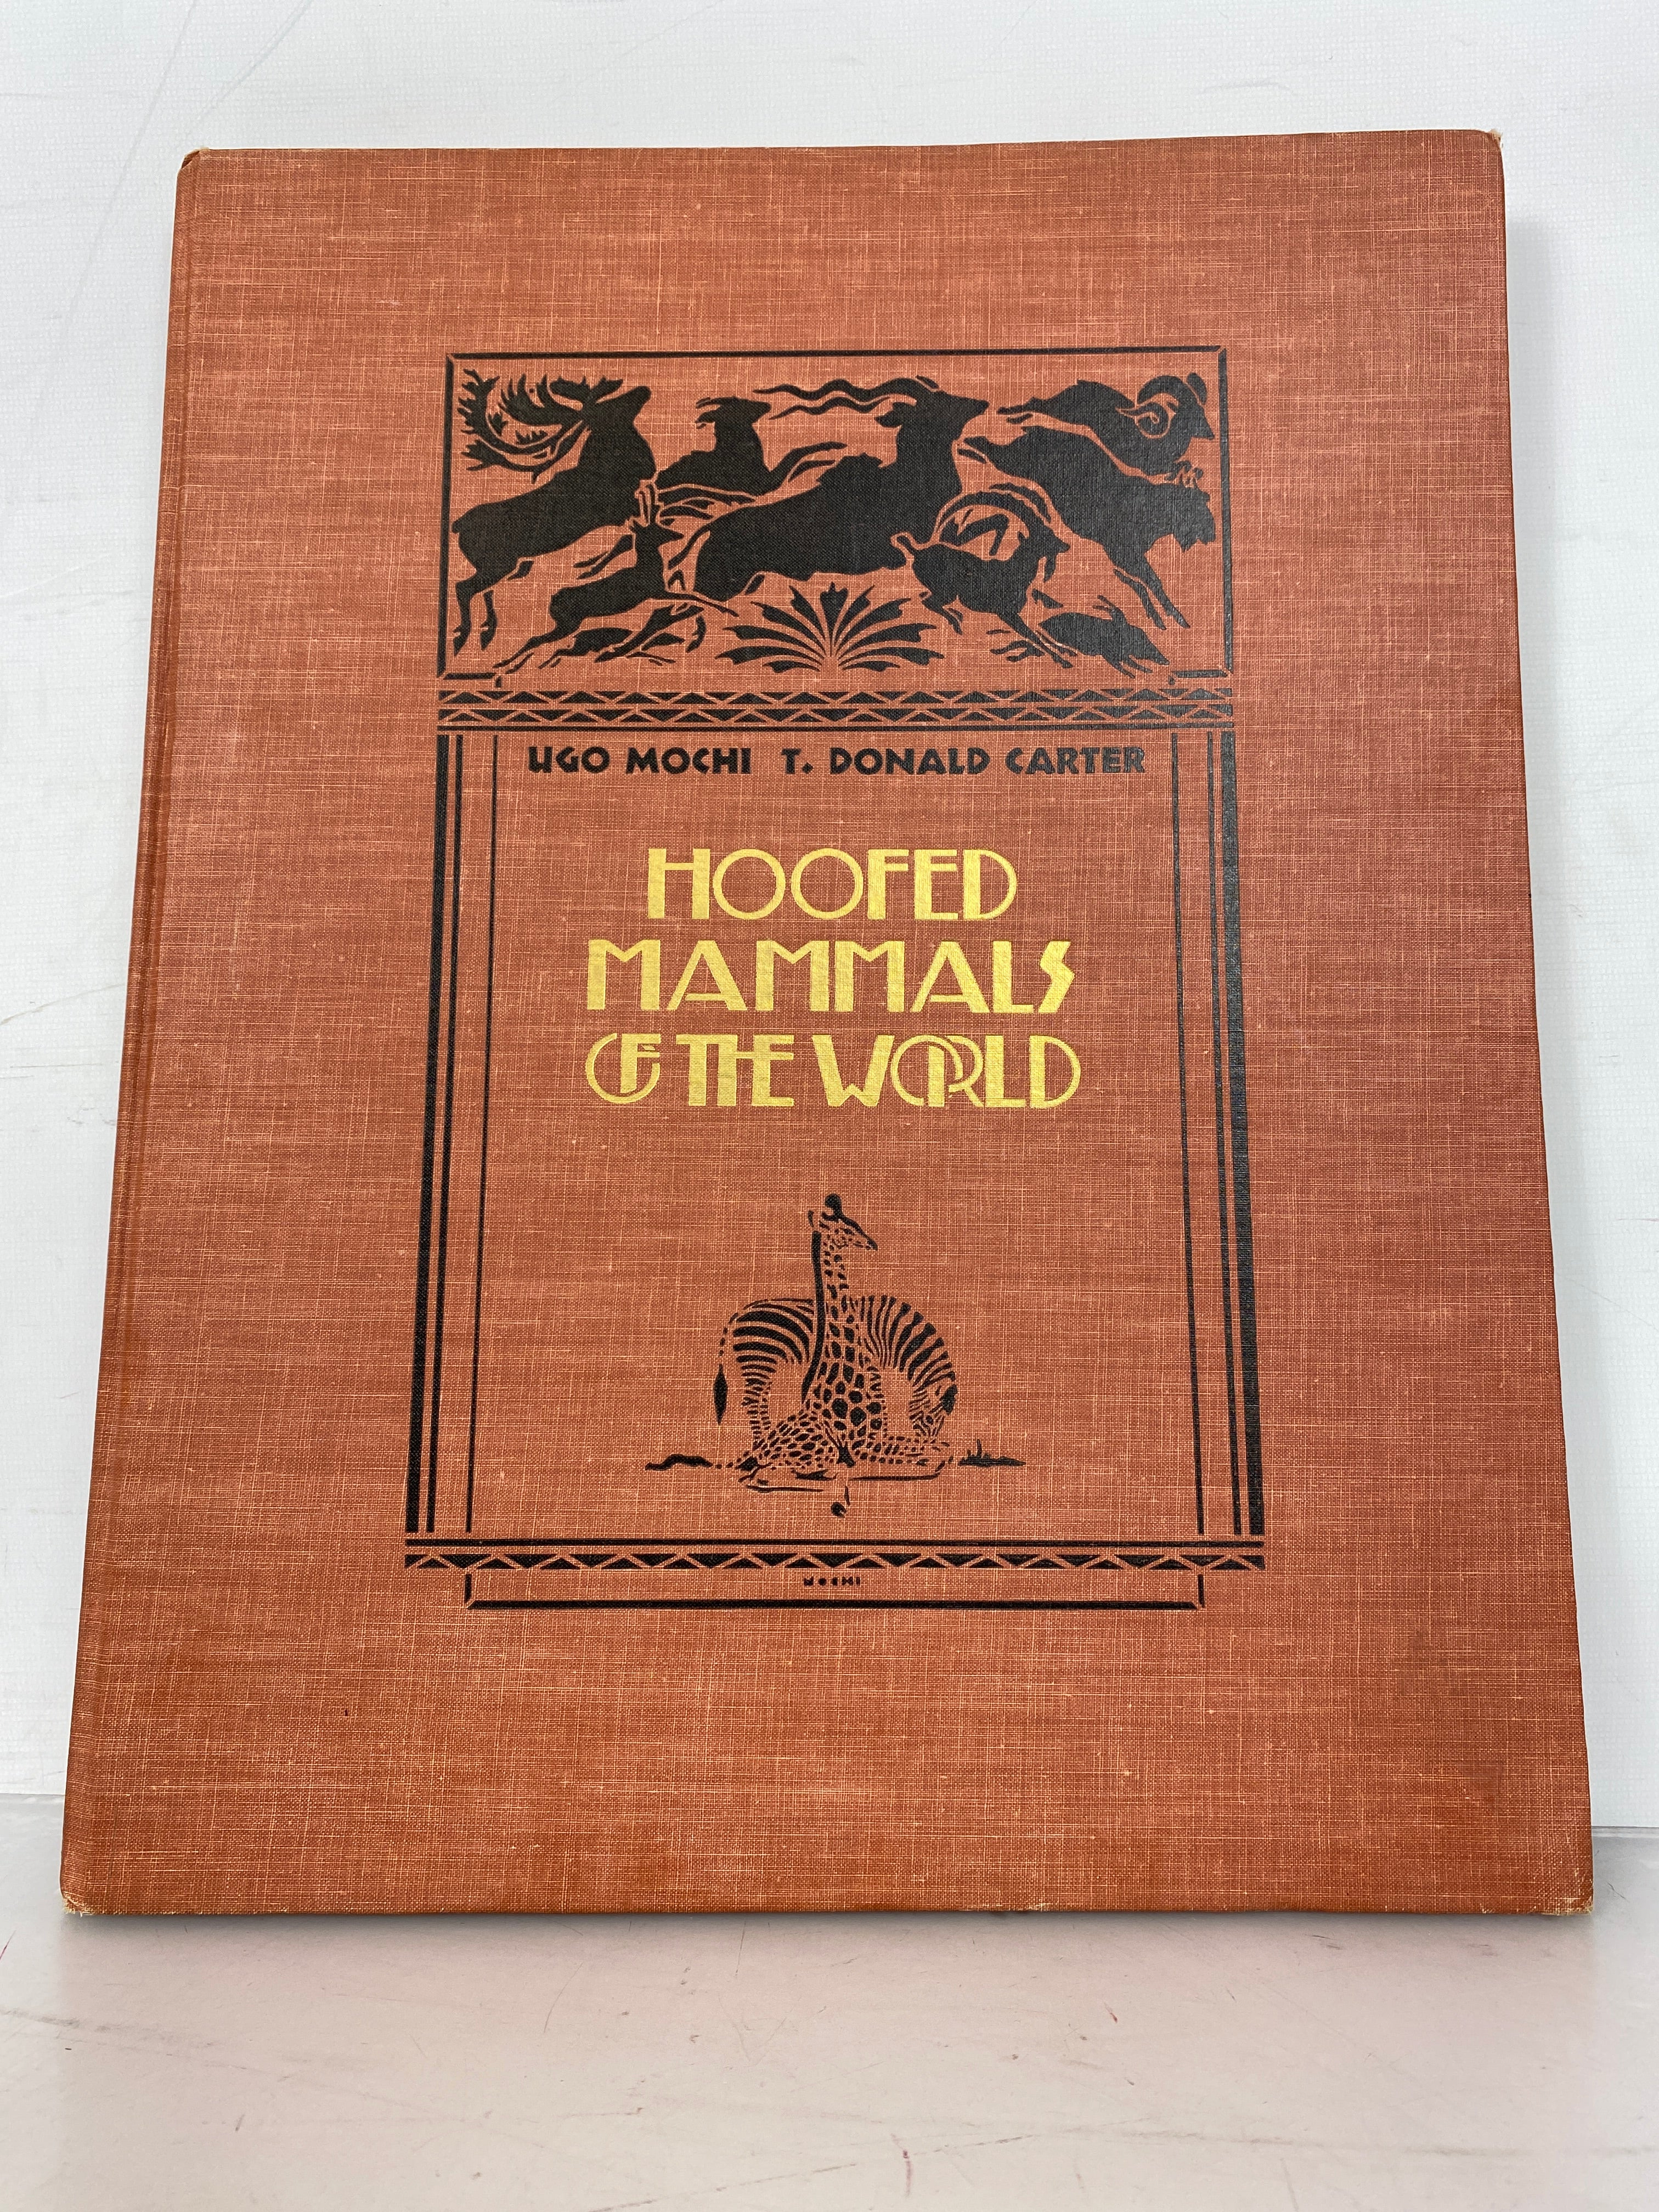 Hoofed Mammals of the World by Ugo Mochi and T. Donald Carter Signed 1953 HC